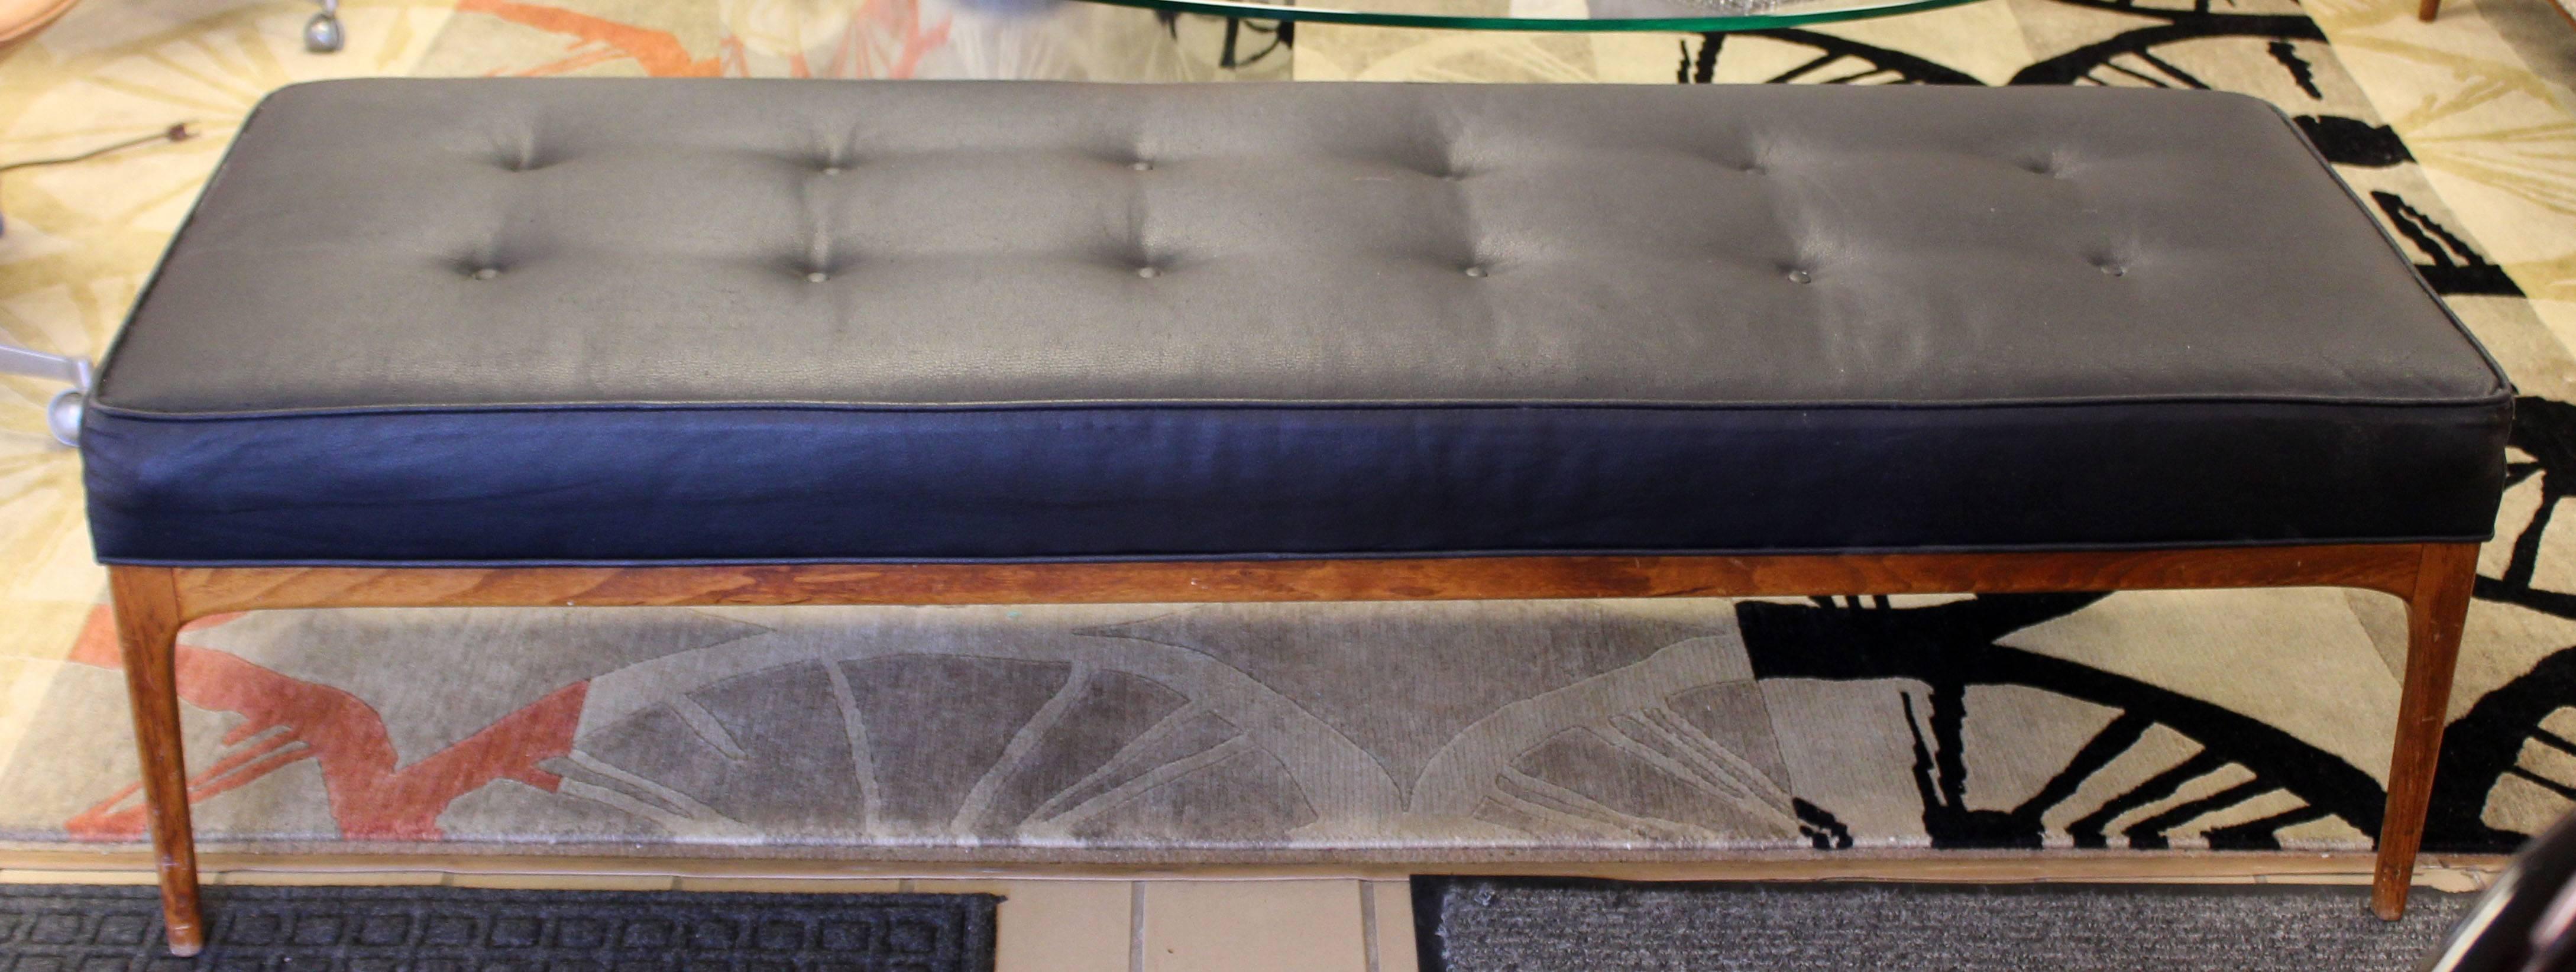 For your consideration is a lovely, long bench seat, made of black vinyl and teak wood. In excellent vintage condition. The dimensions are 60